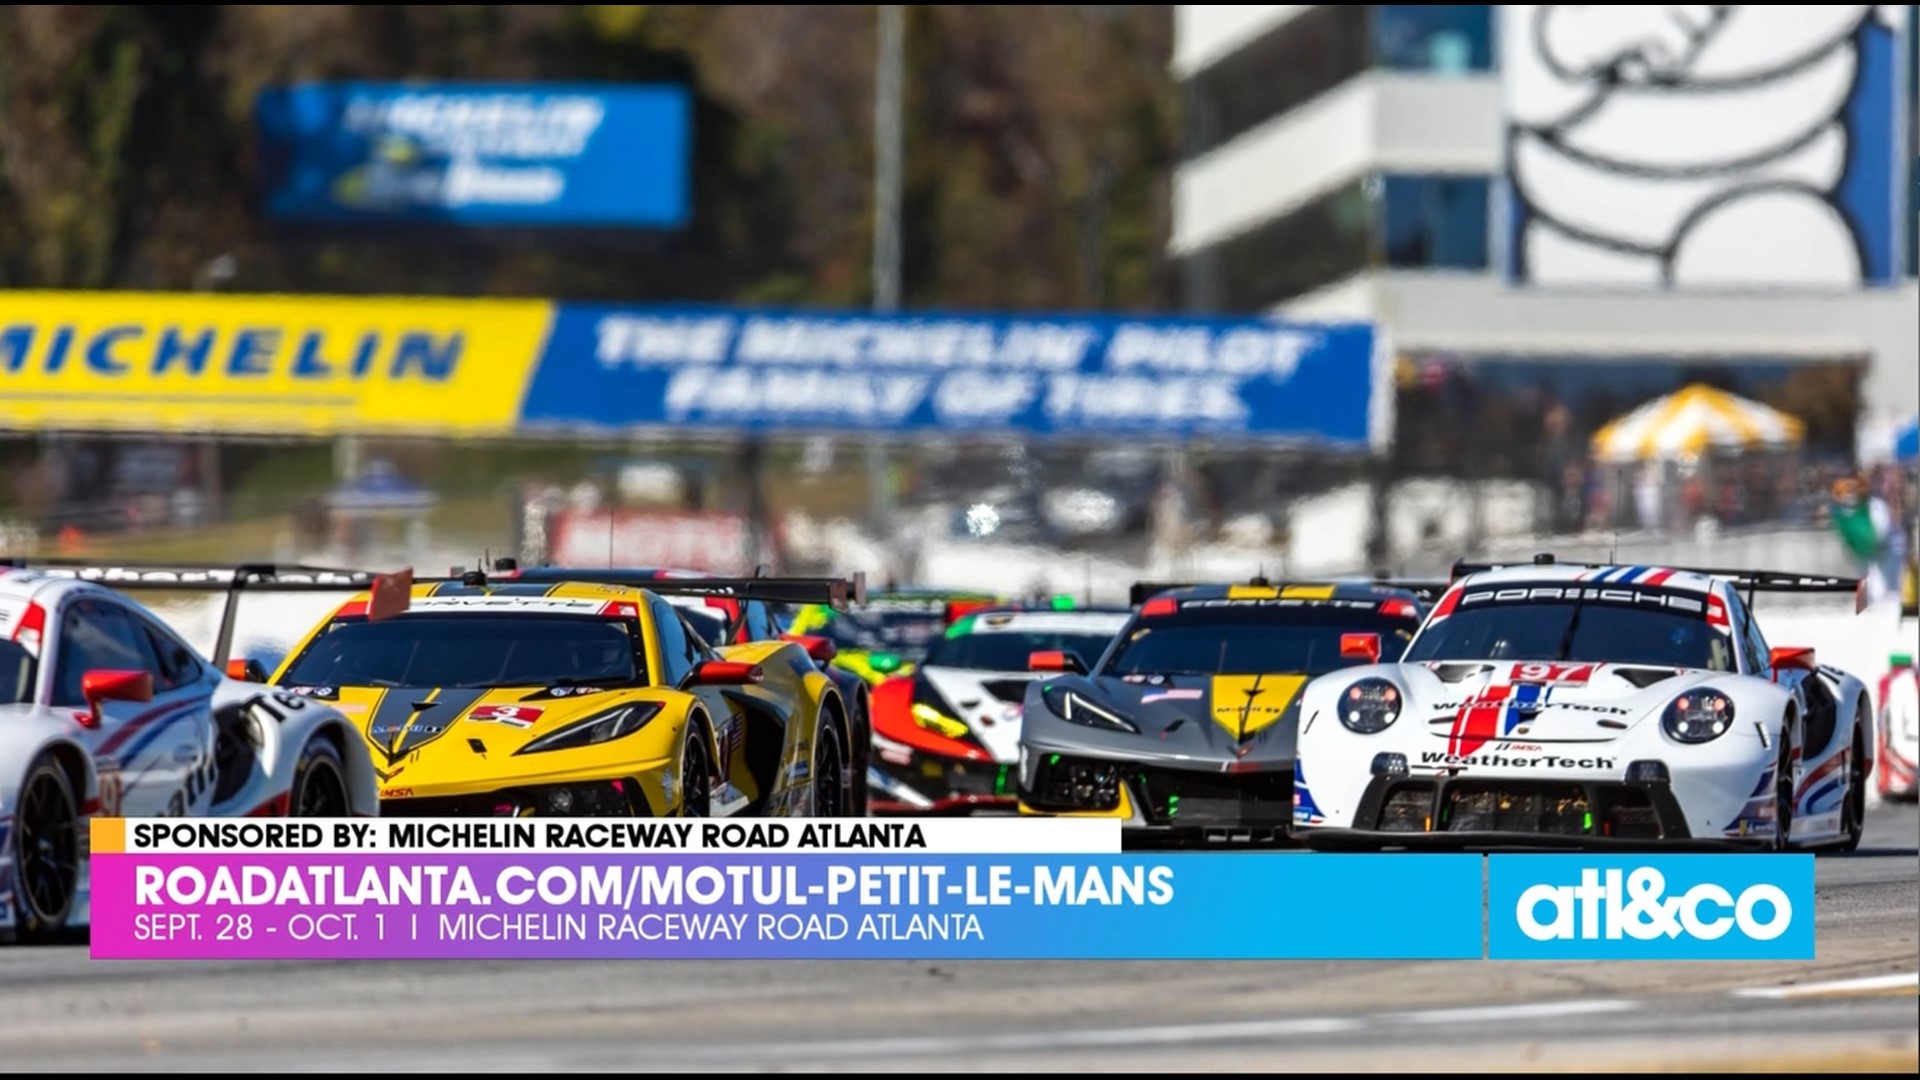 Rev up your engines for the Motul Petit Le Mans at the Michelin Raceway Road Atlanta!